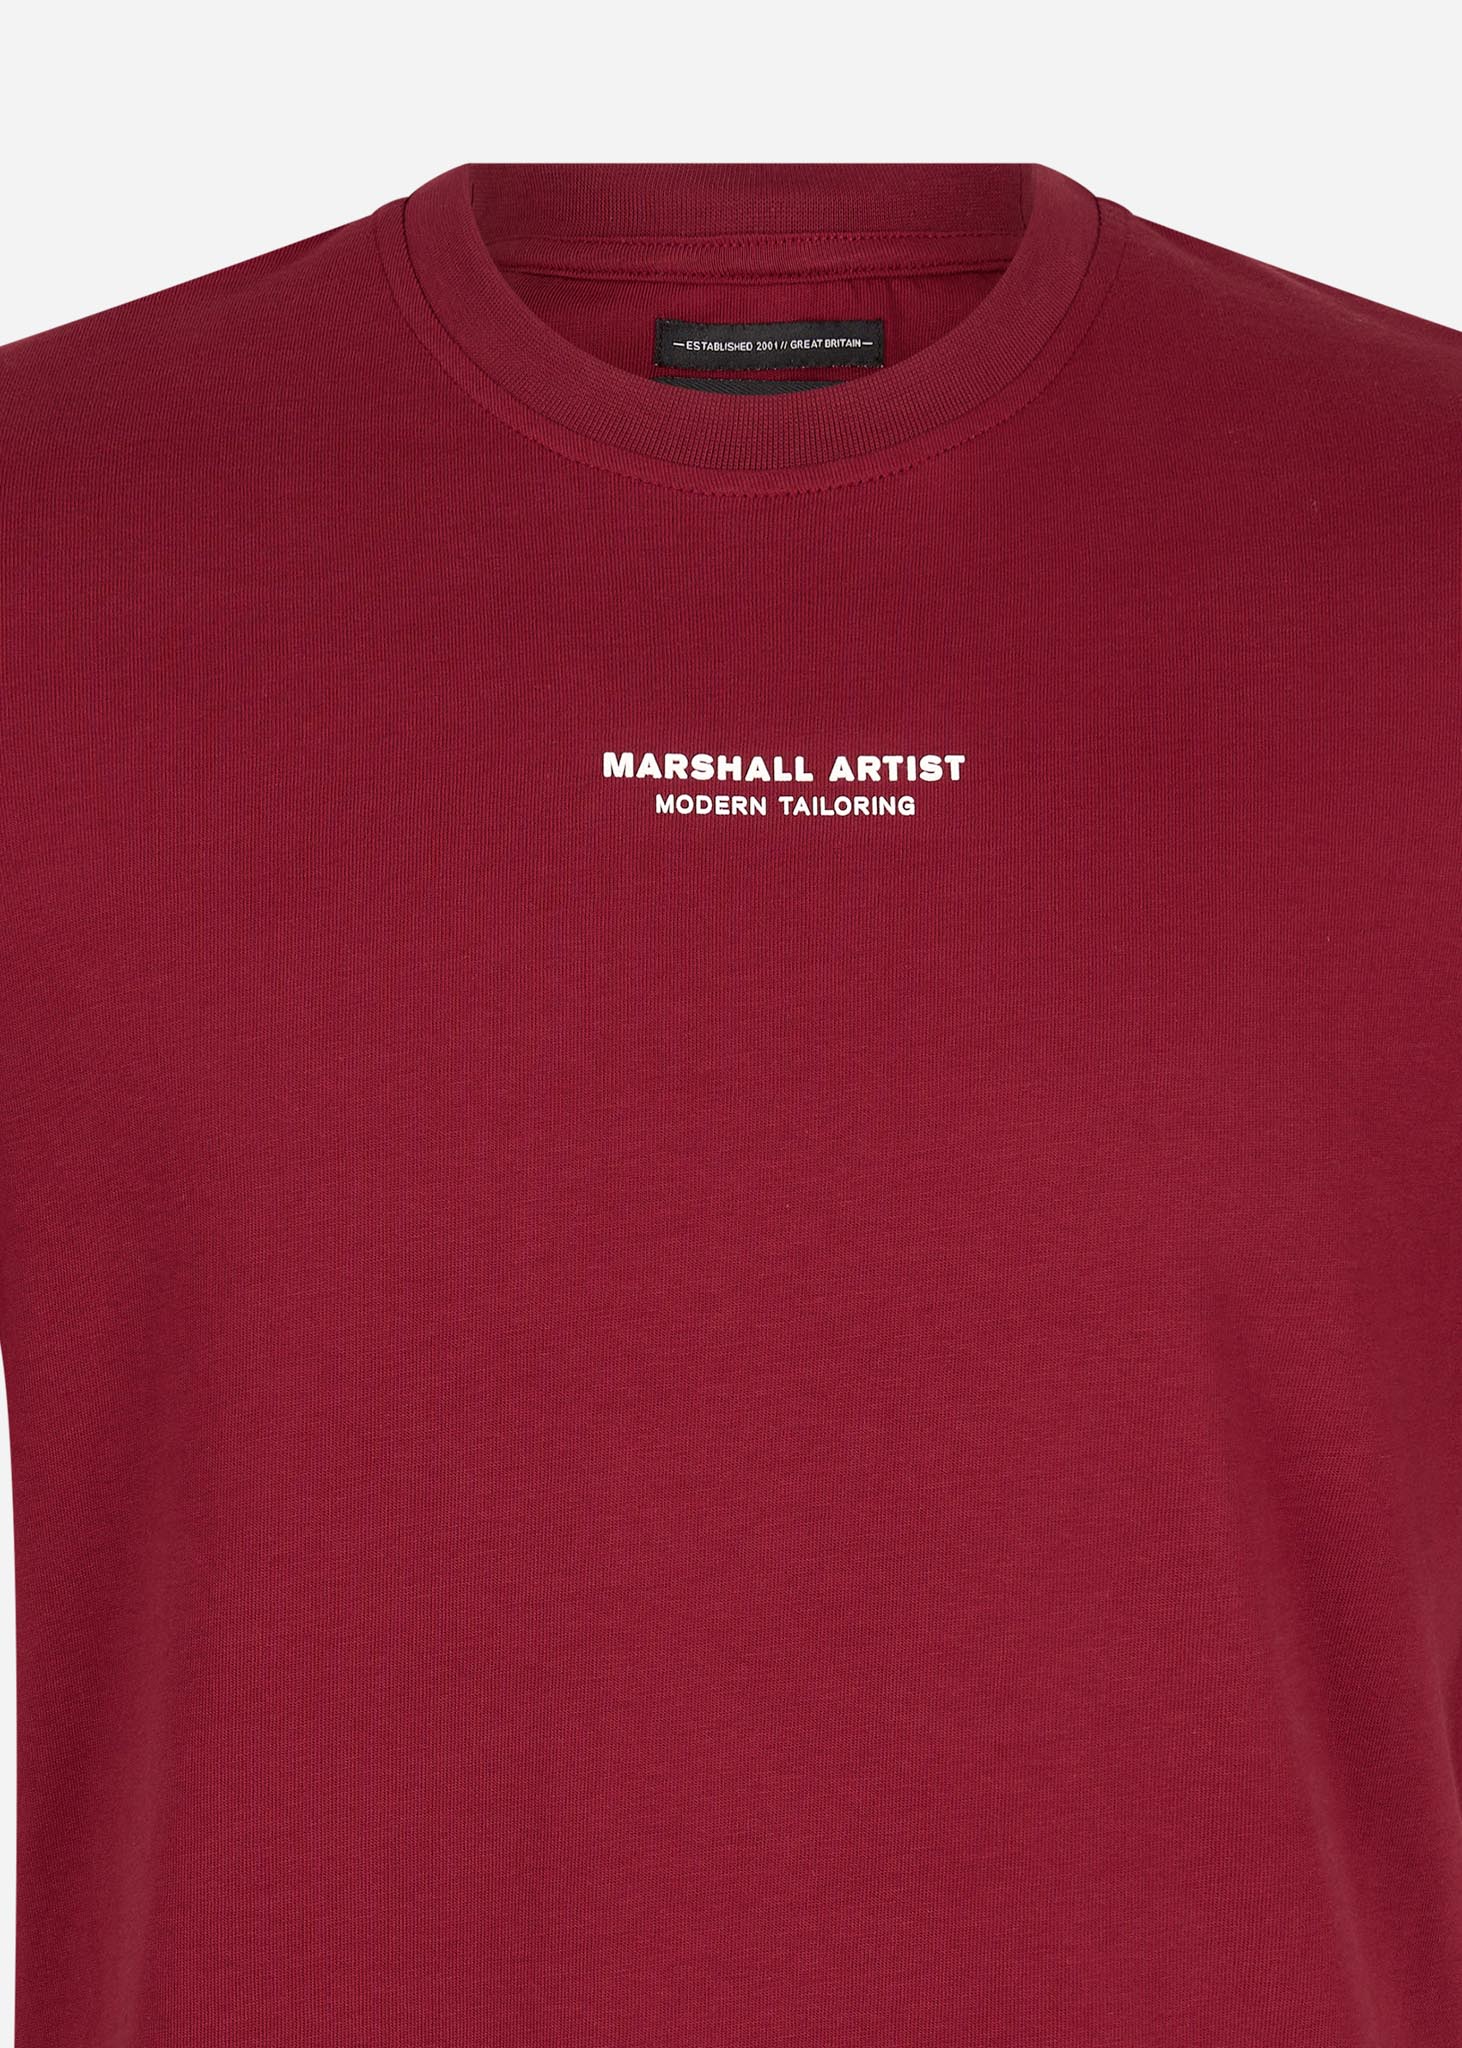 Marshall Artist T-shirts  Injection t-shirt - guard red 